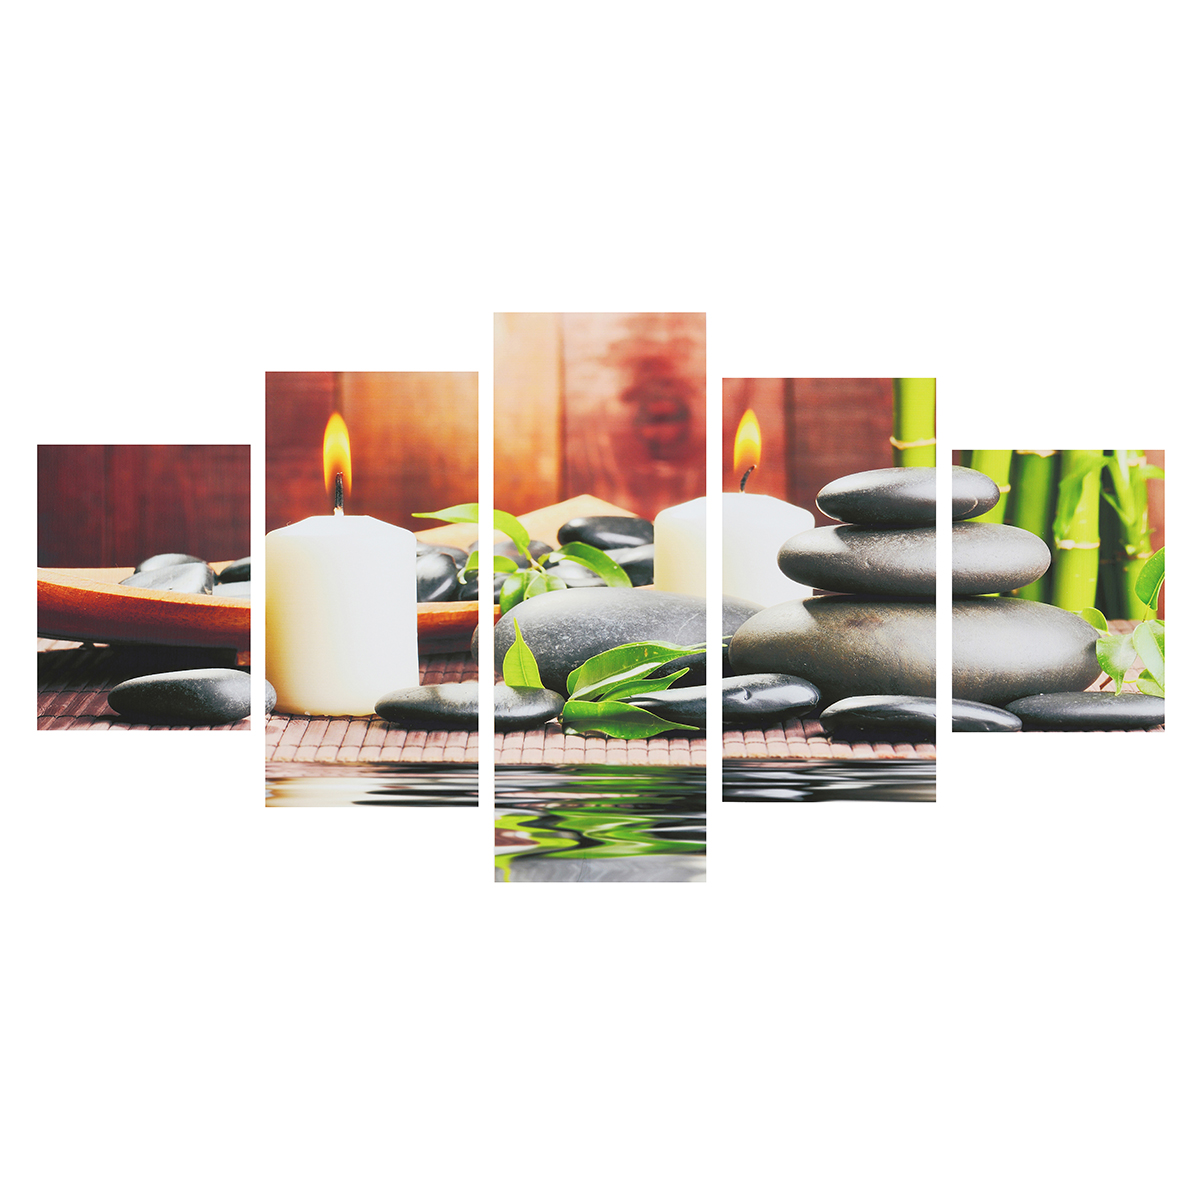 5Pcs-Canvas-Painting-Candle-Scenery-Picture-Wall-Decorative-Print-Art-Pictures-Frameless-Wall-Hangin-1803082-1